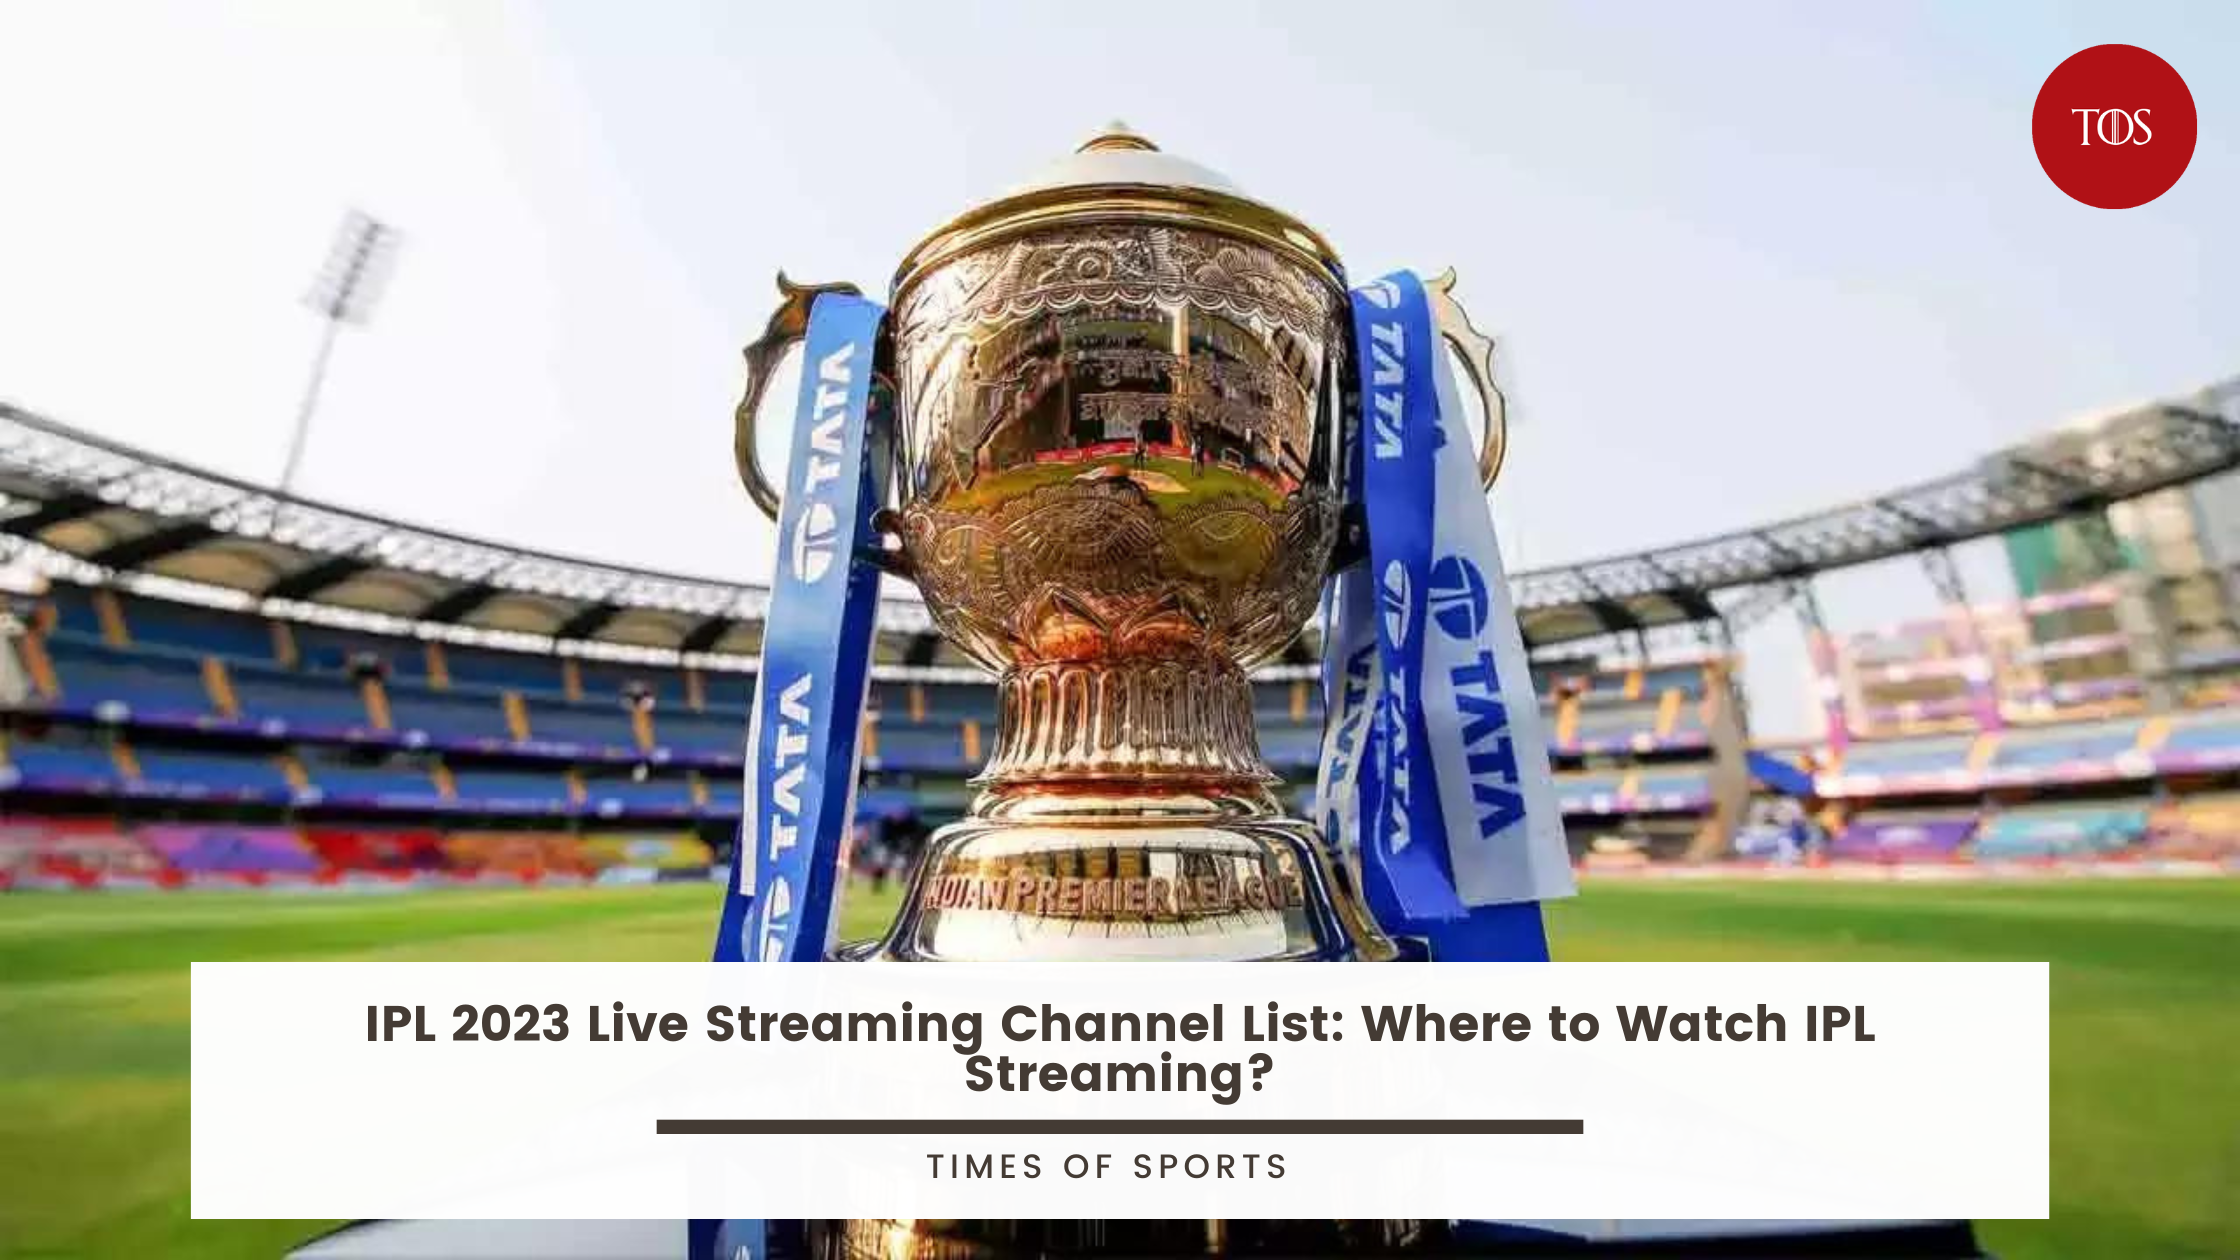 IPL 2023 Live Telecast Channel List Where to Watch IPL Streaming?